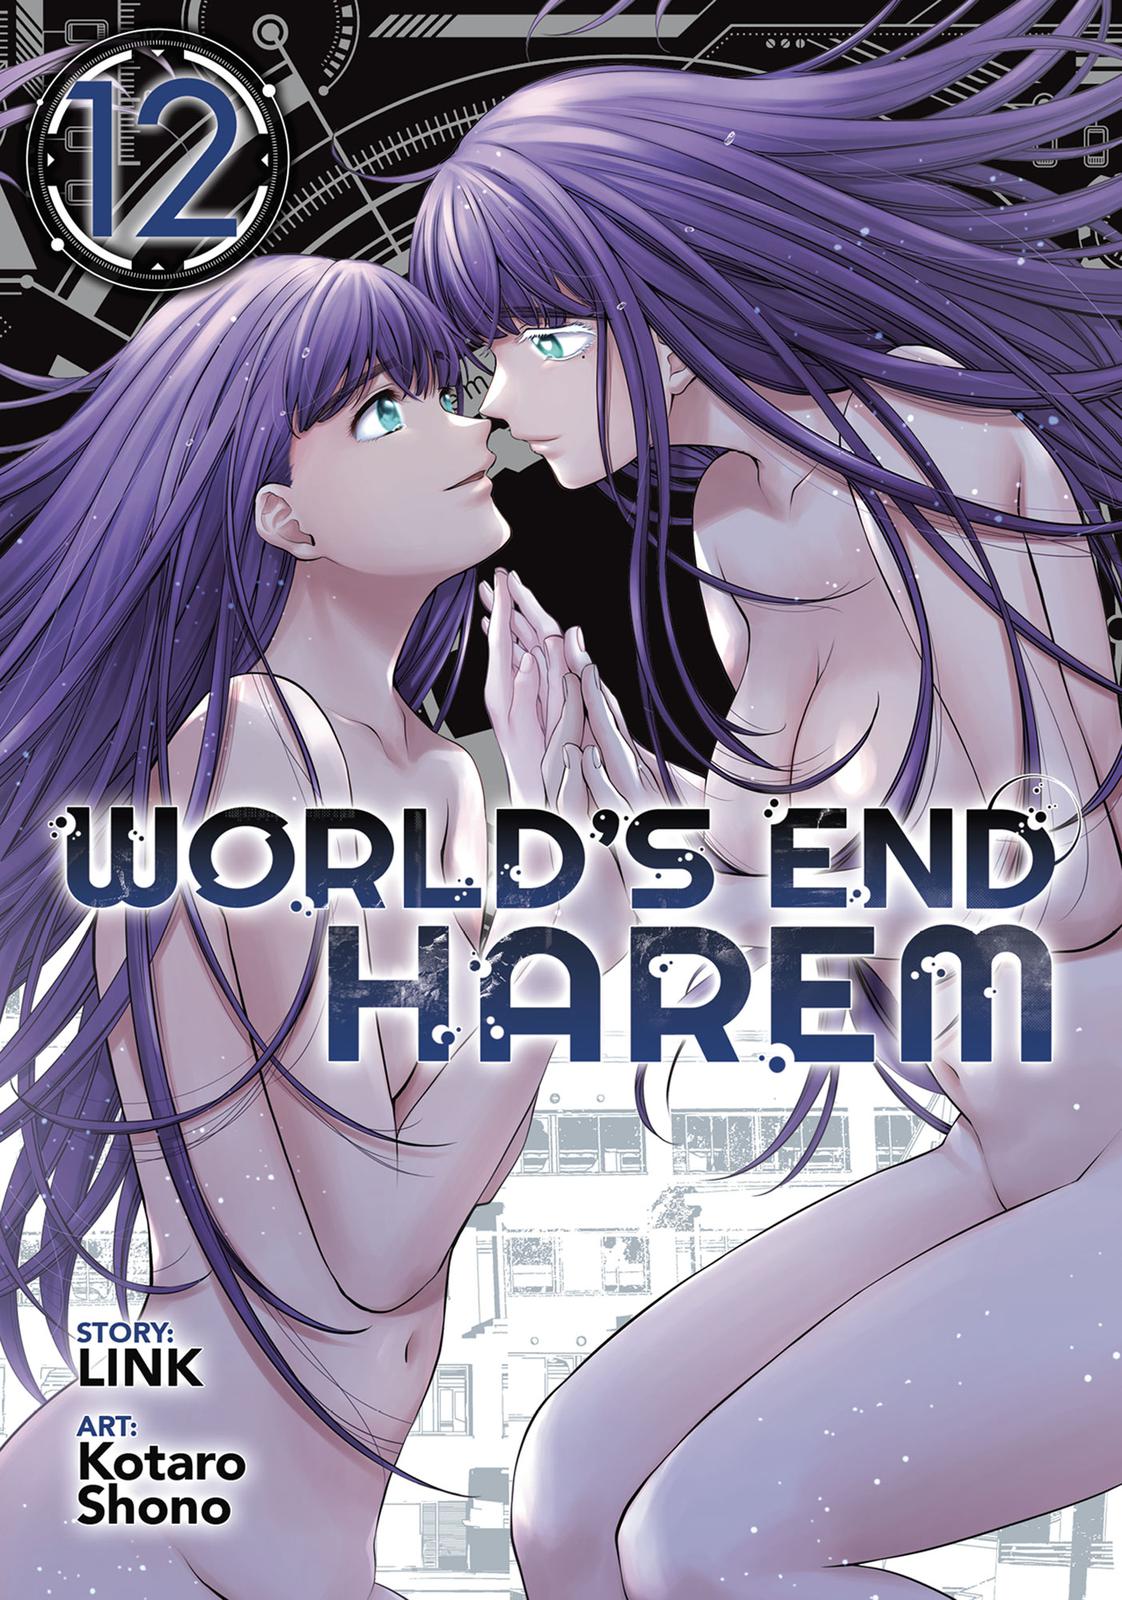 World's End Harem, Chapter 79  TcbScans Net - TCBscans - Free Manga Online  in High Quality